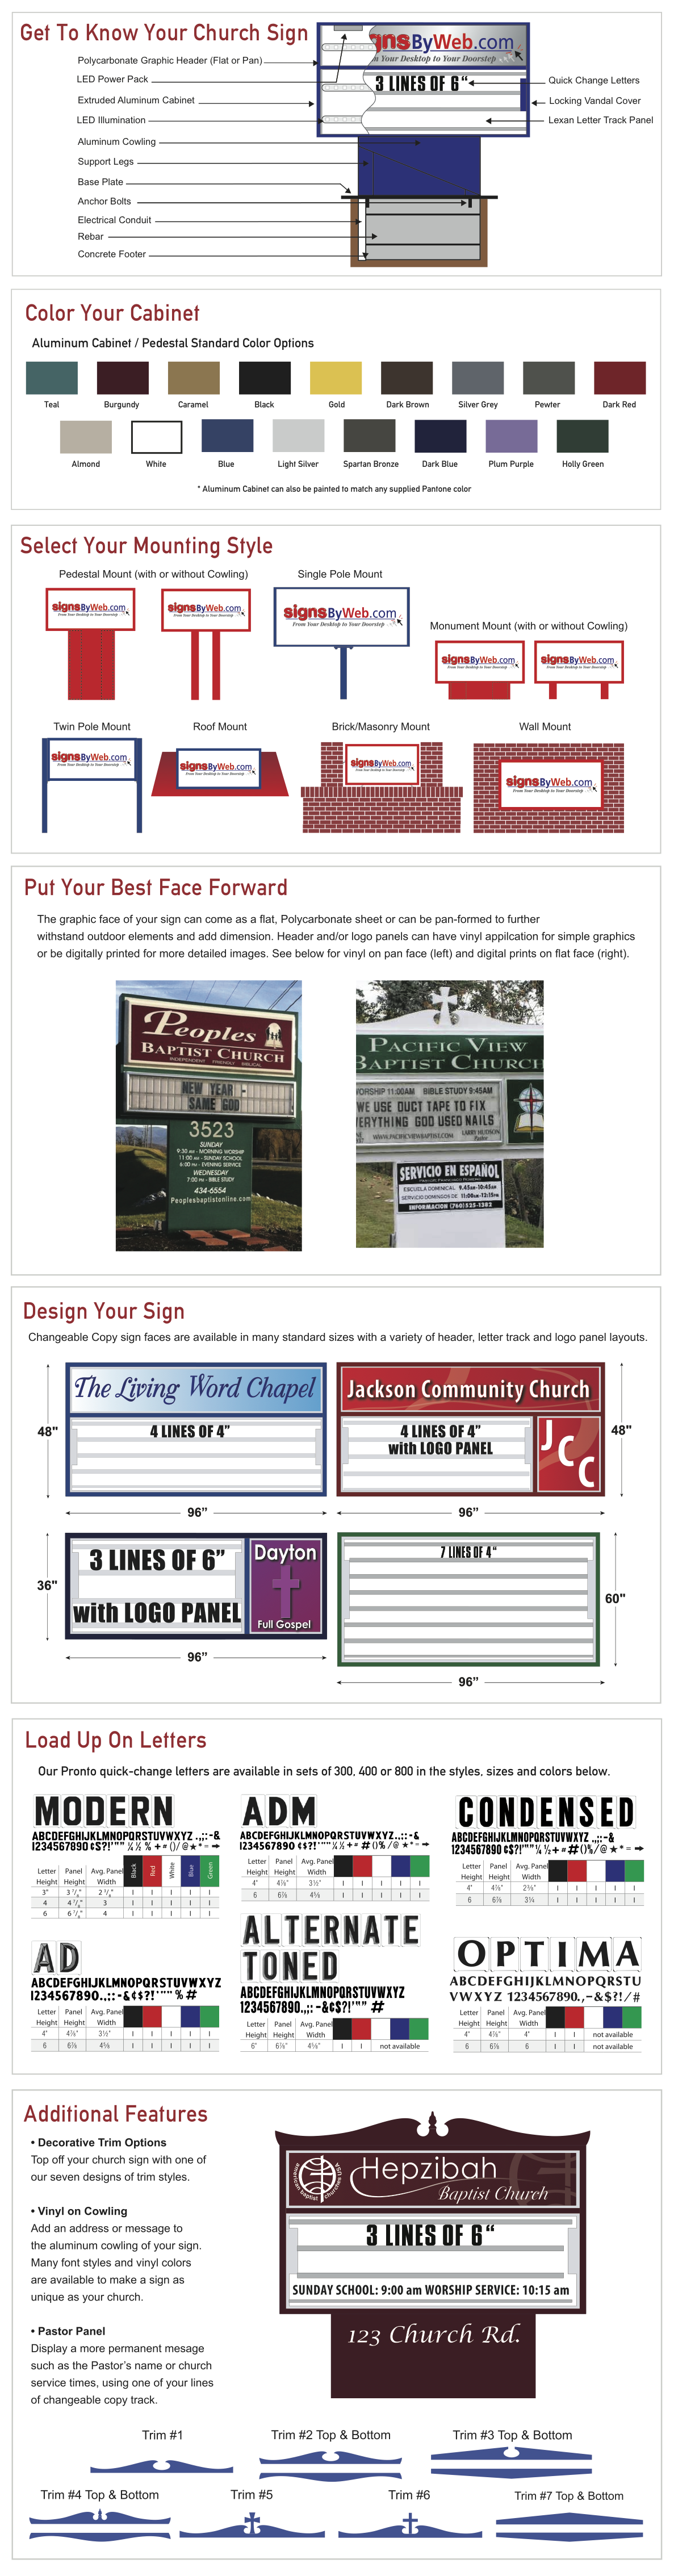 Signs By Web - Info Page - Church Sign Changeable Copy Faces